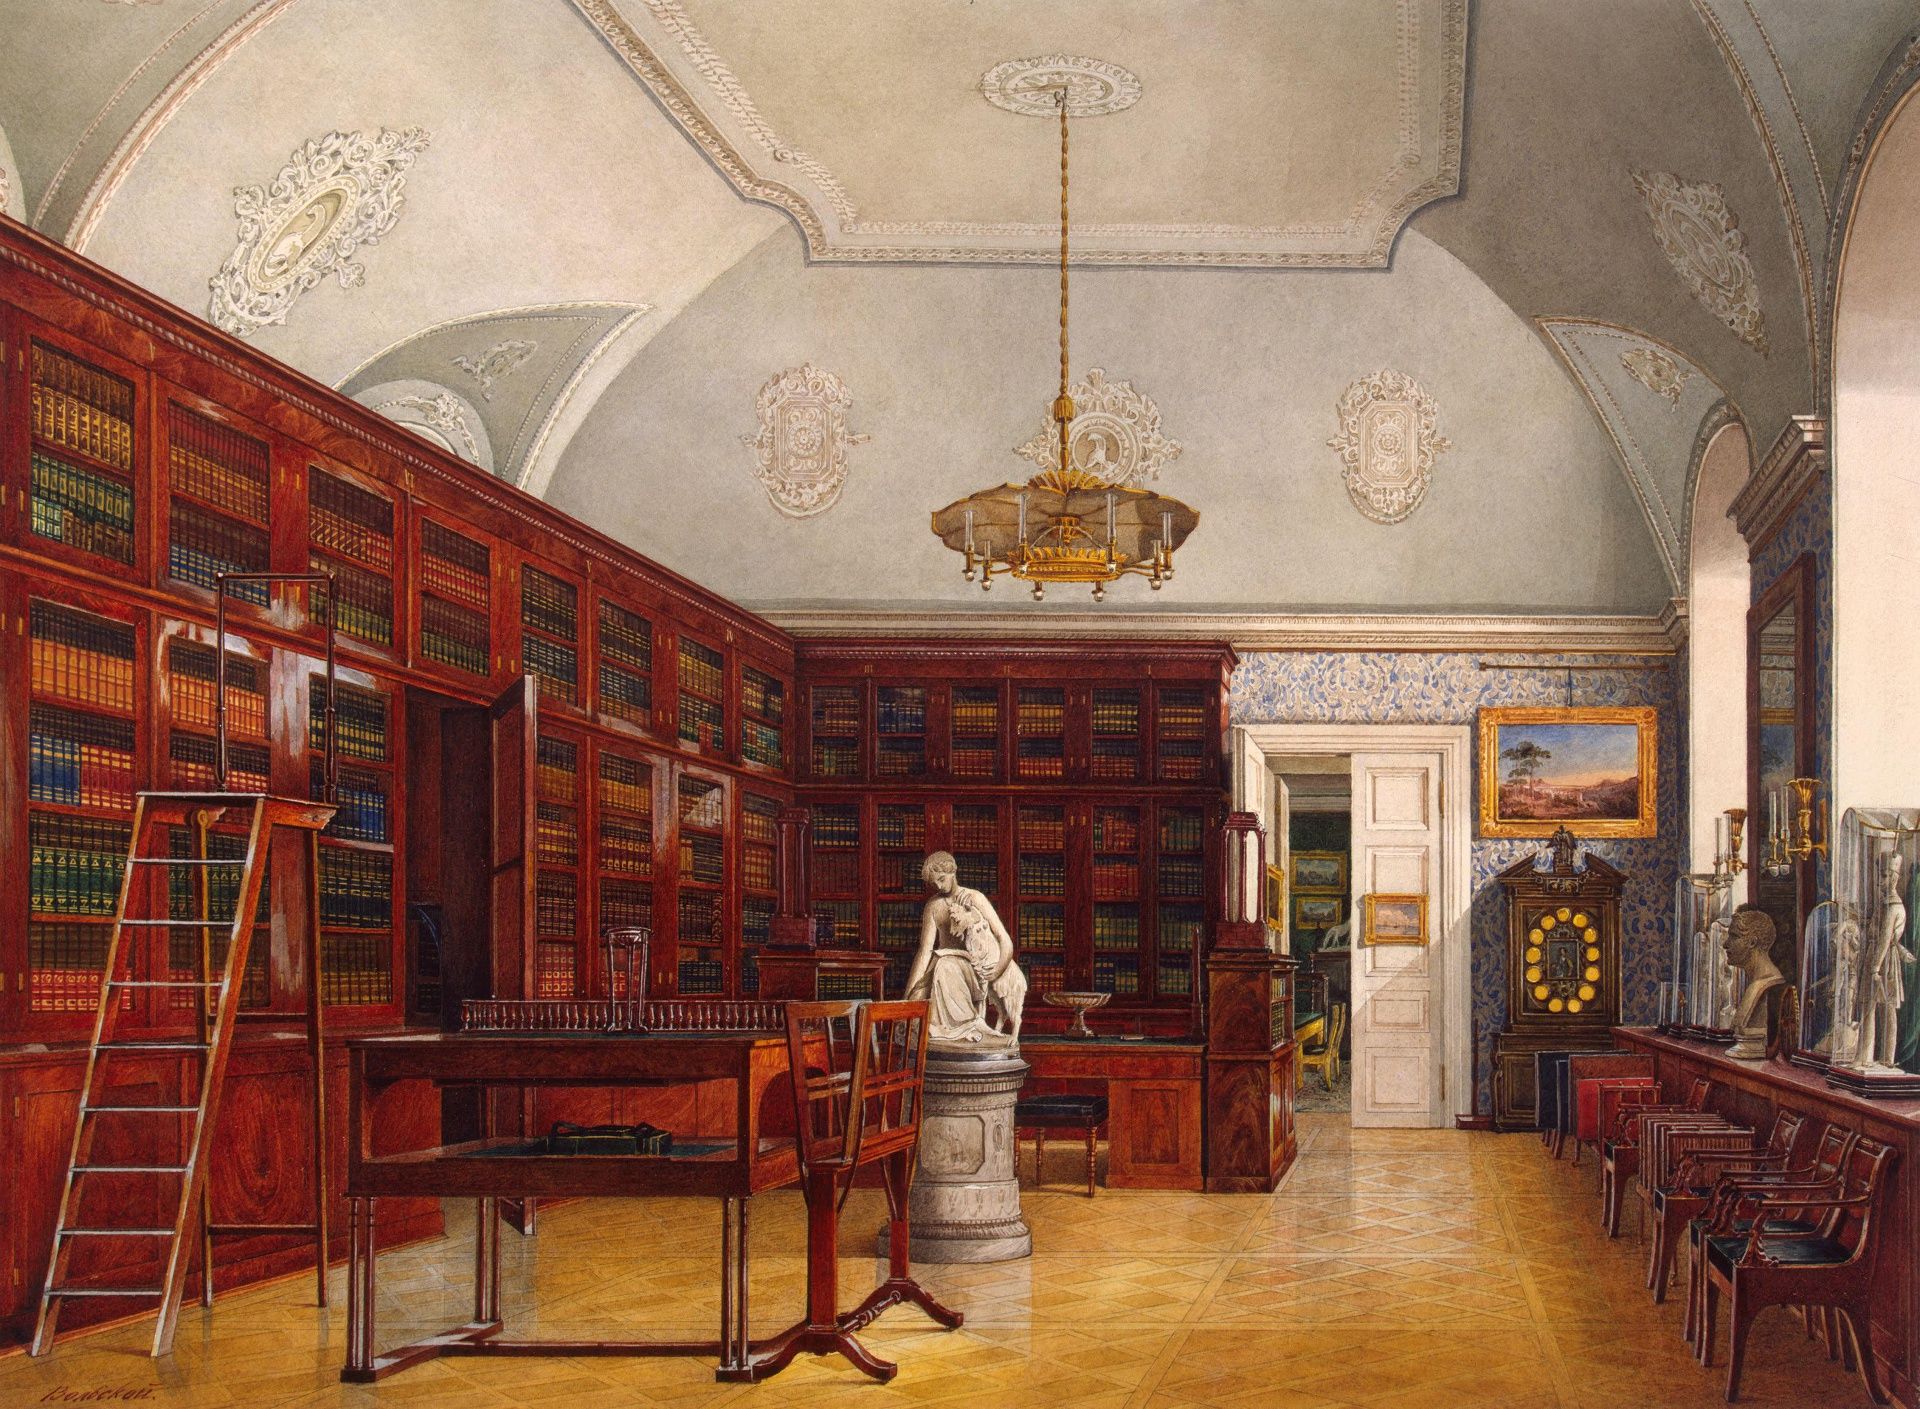 Bookshelves dominate the center of this white arched room, with small marble statues, a desk, and some chairs filling the rest of the space. Illumination comes from tall windows on the right-hand wall.